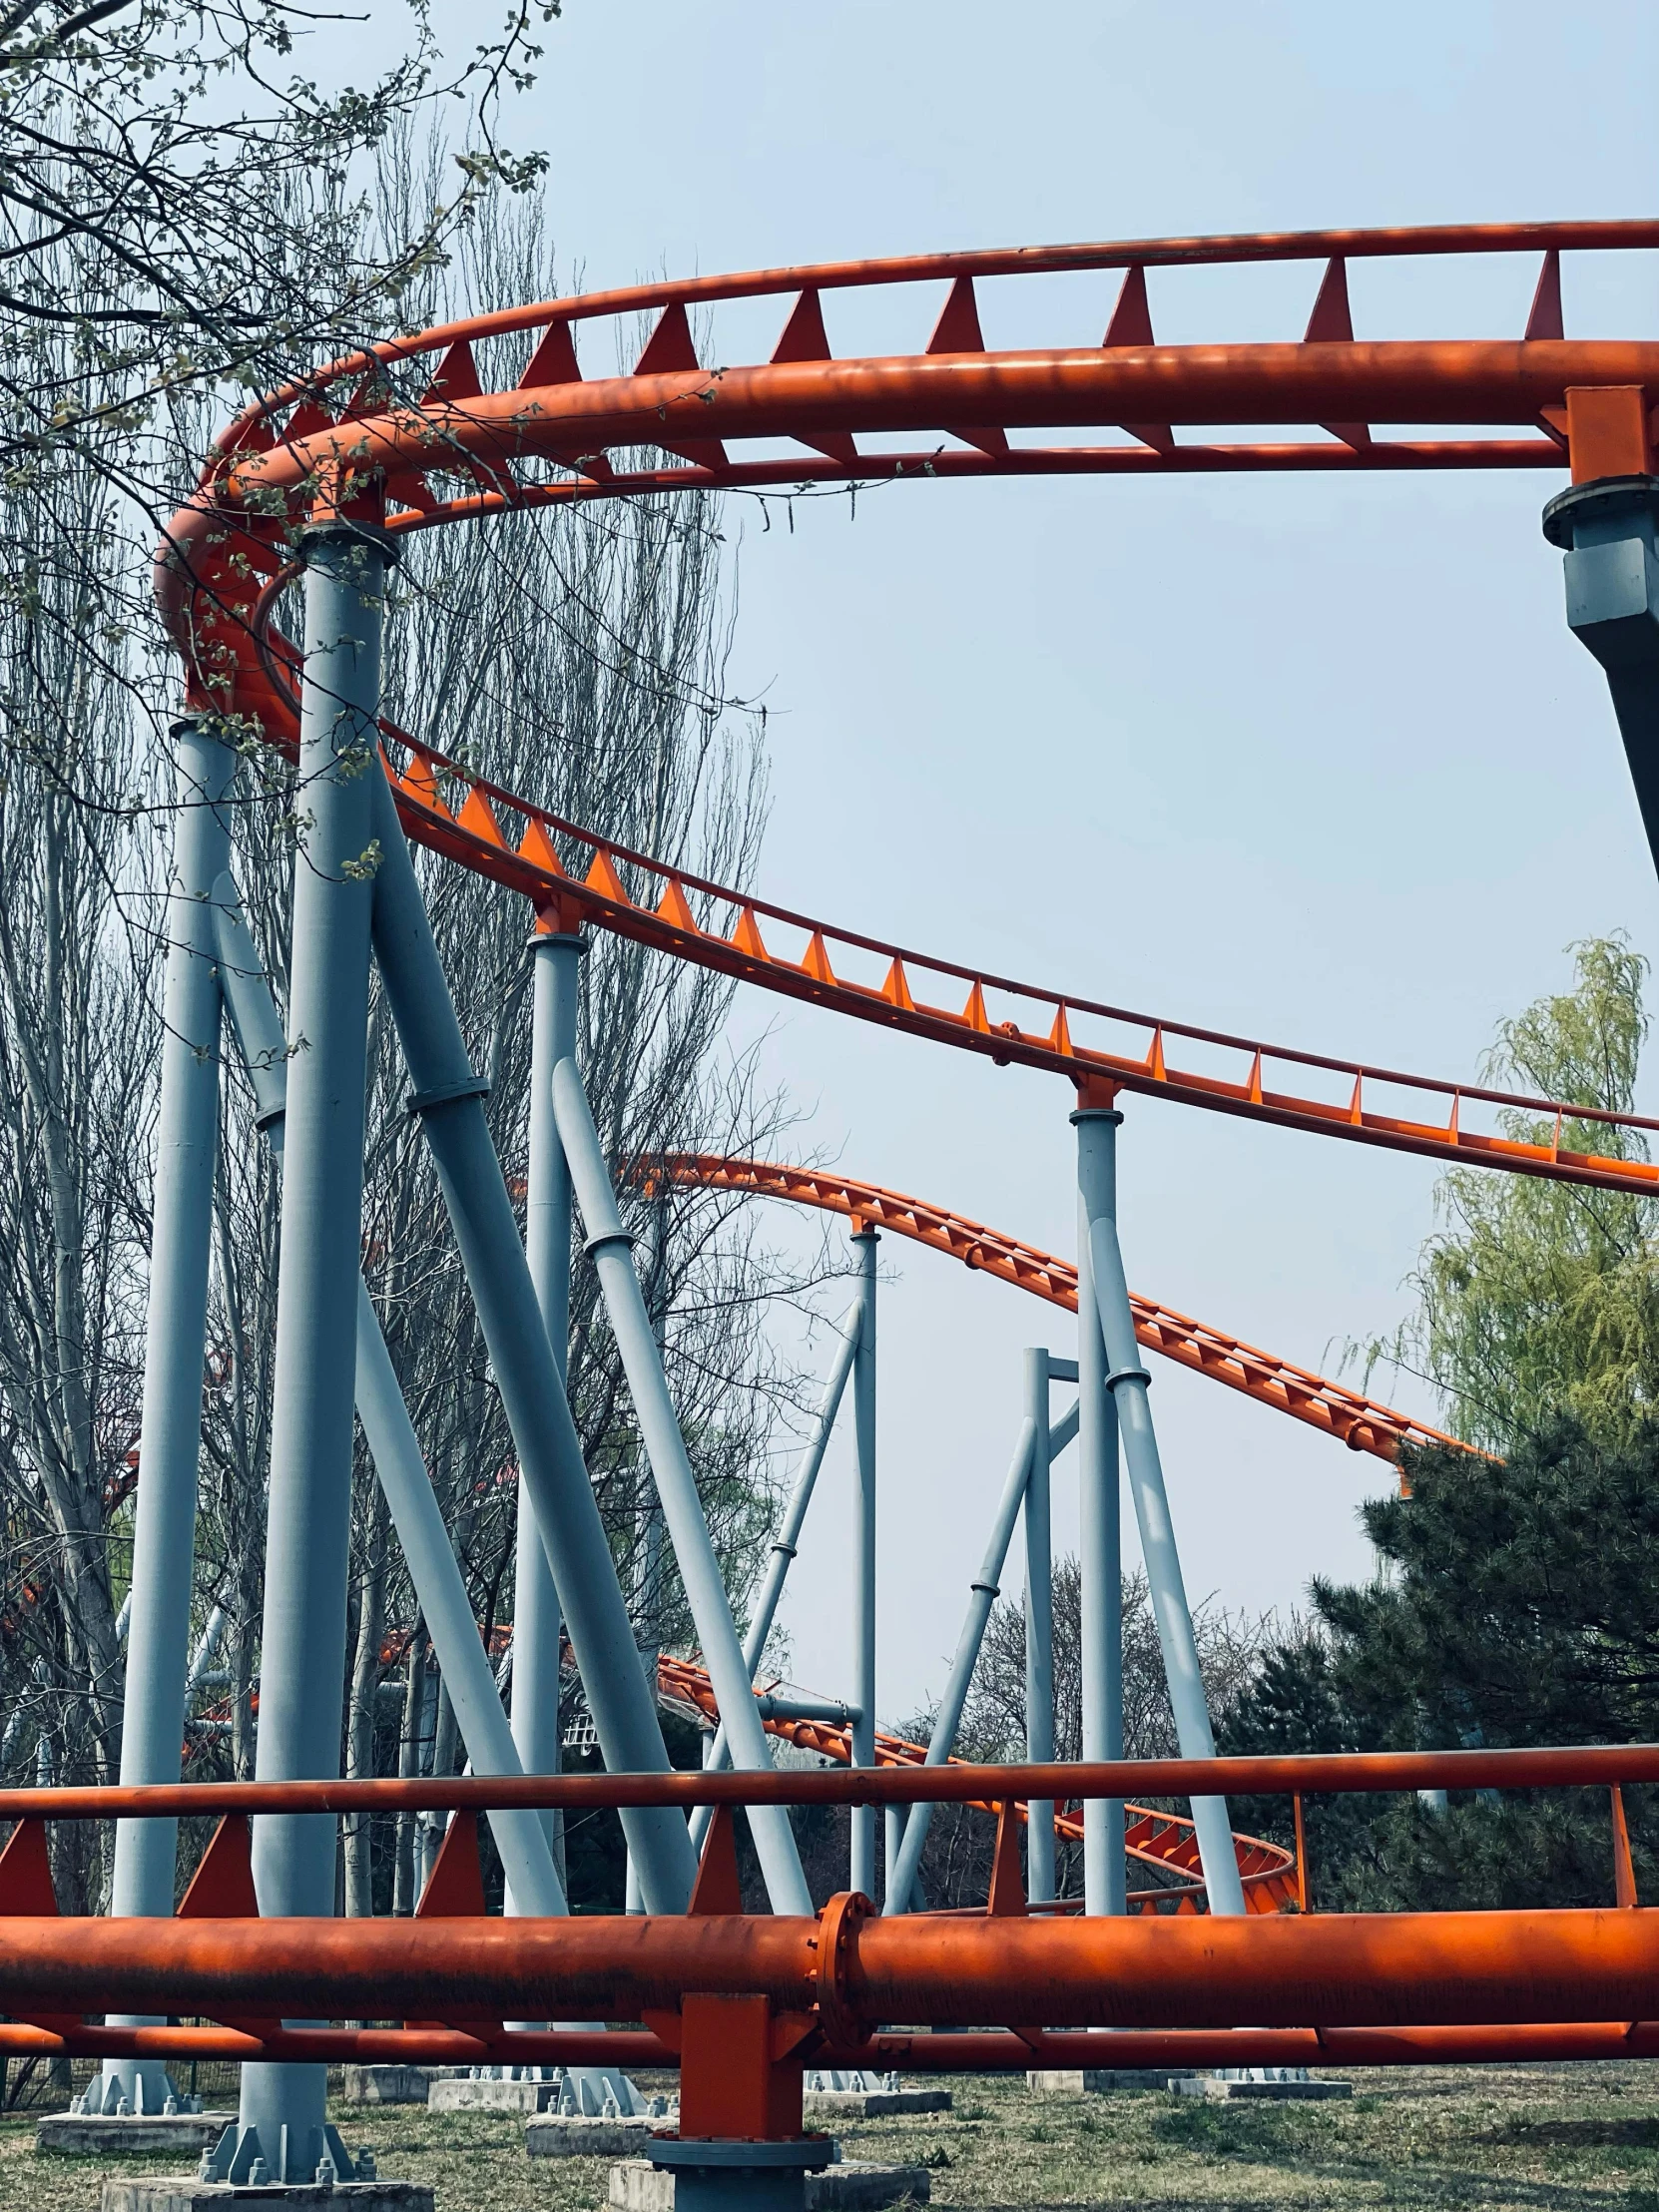 the new coaster roller at an amut park